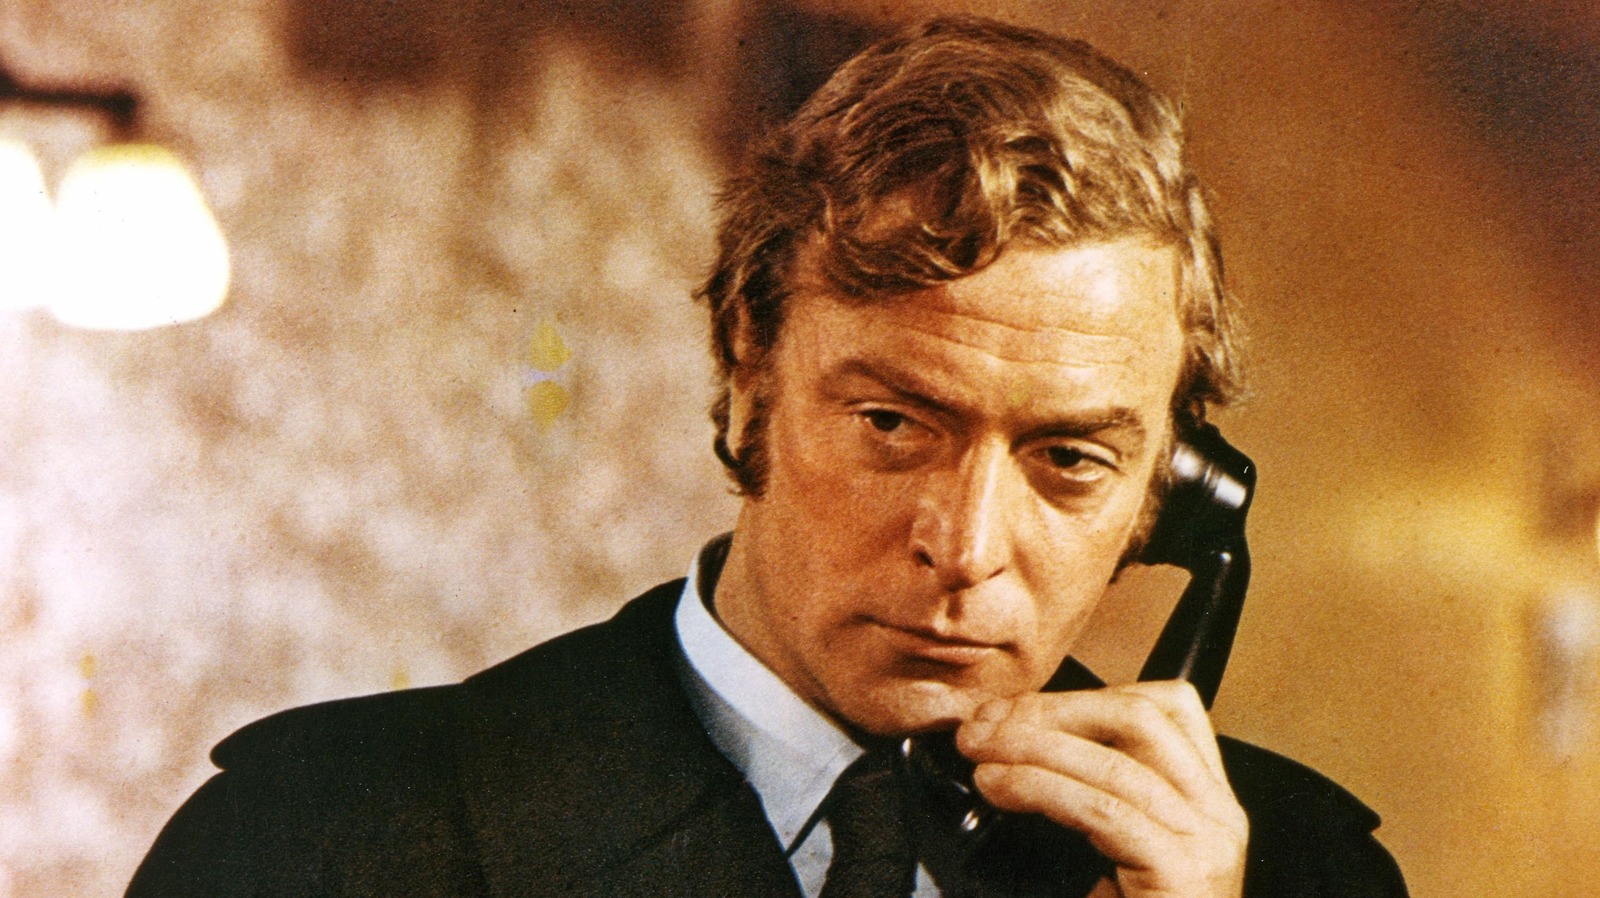 #The Classic Film That Inspired Michael Caine To Be An Actor